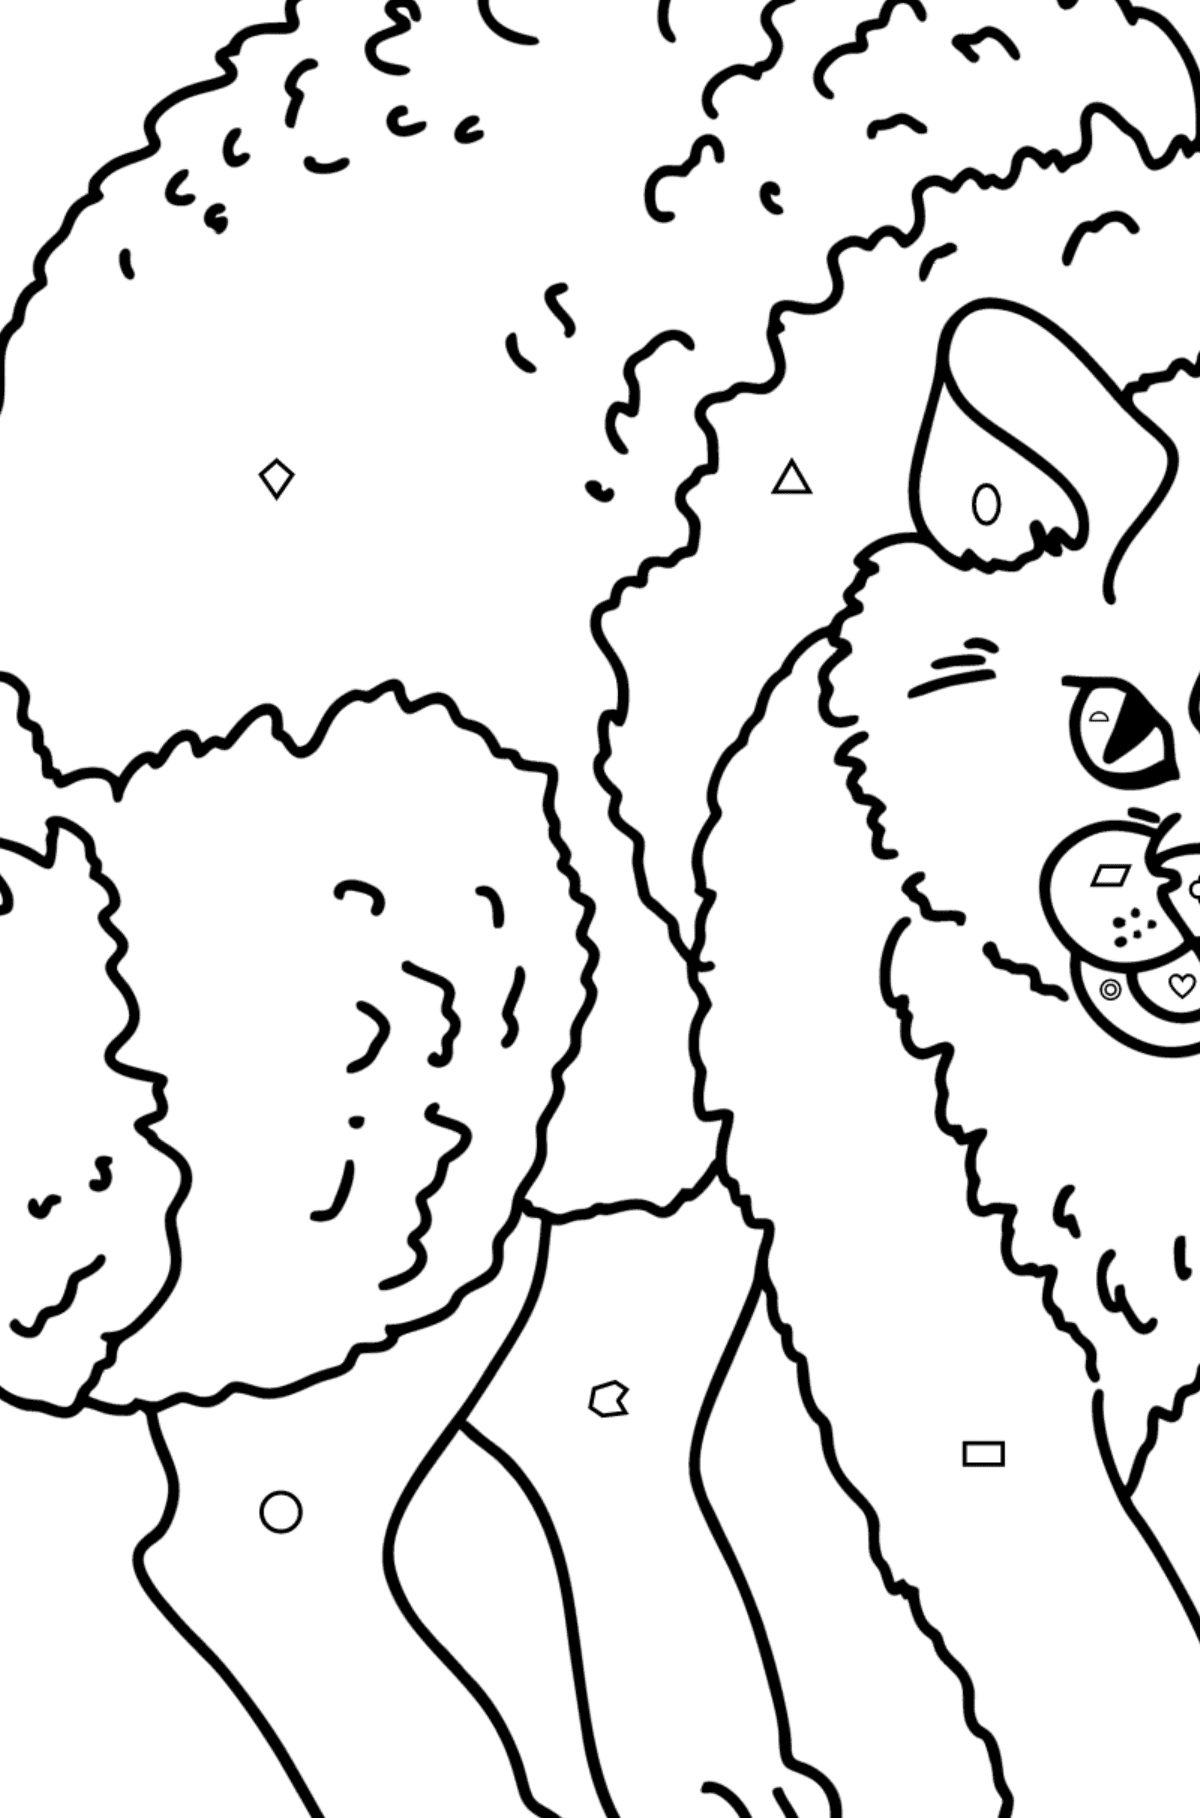 Grumpy Cat coloring page - Coloring by Geometric Shapes for Kids